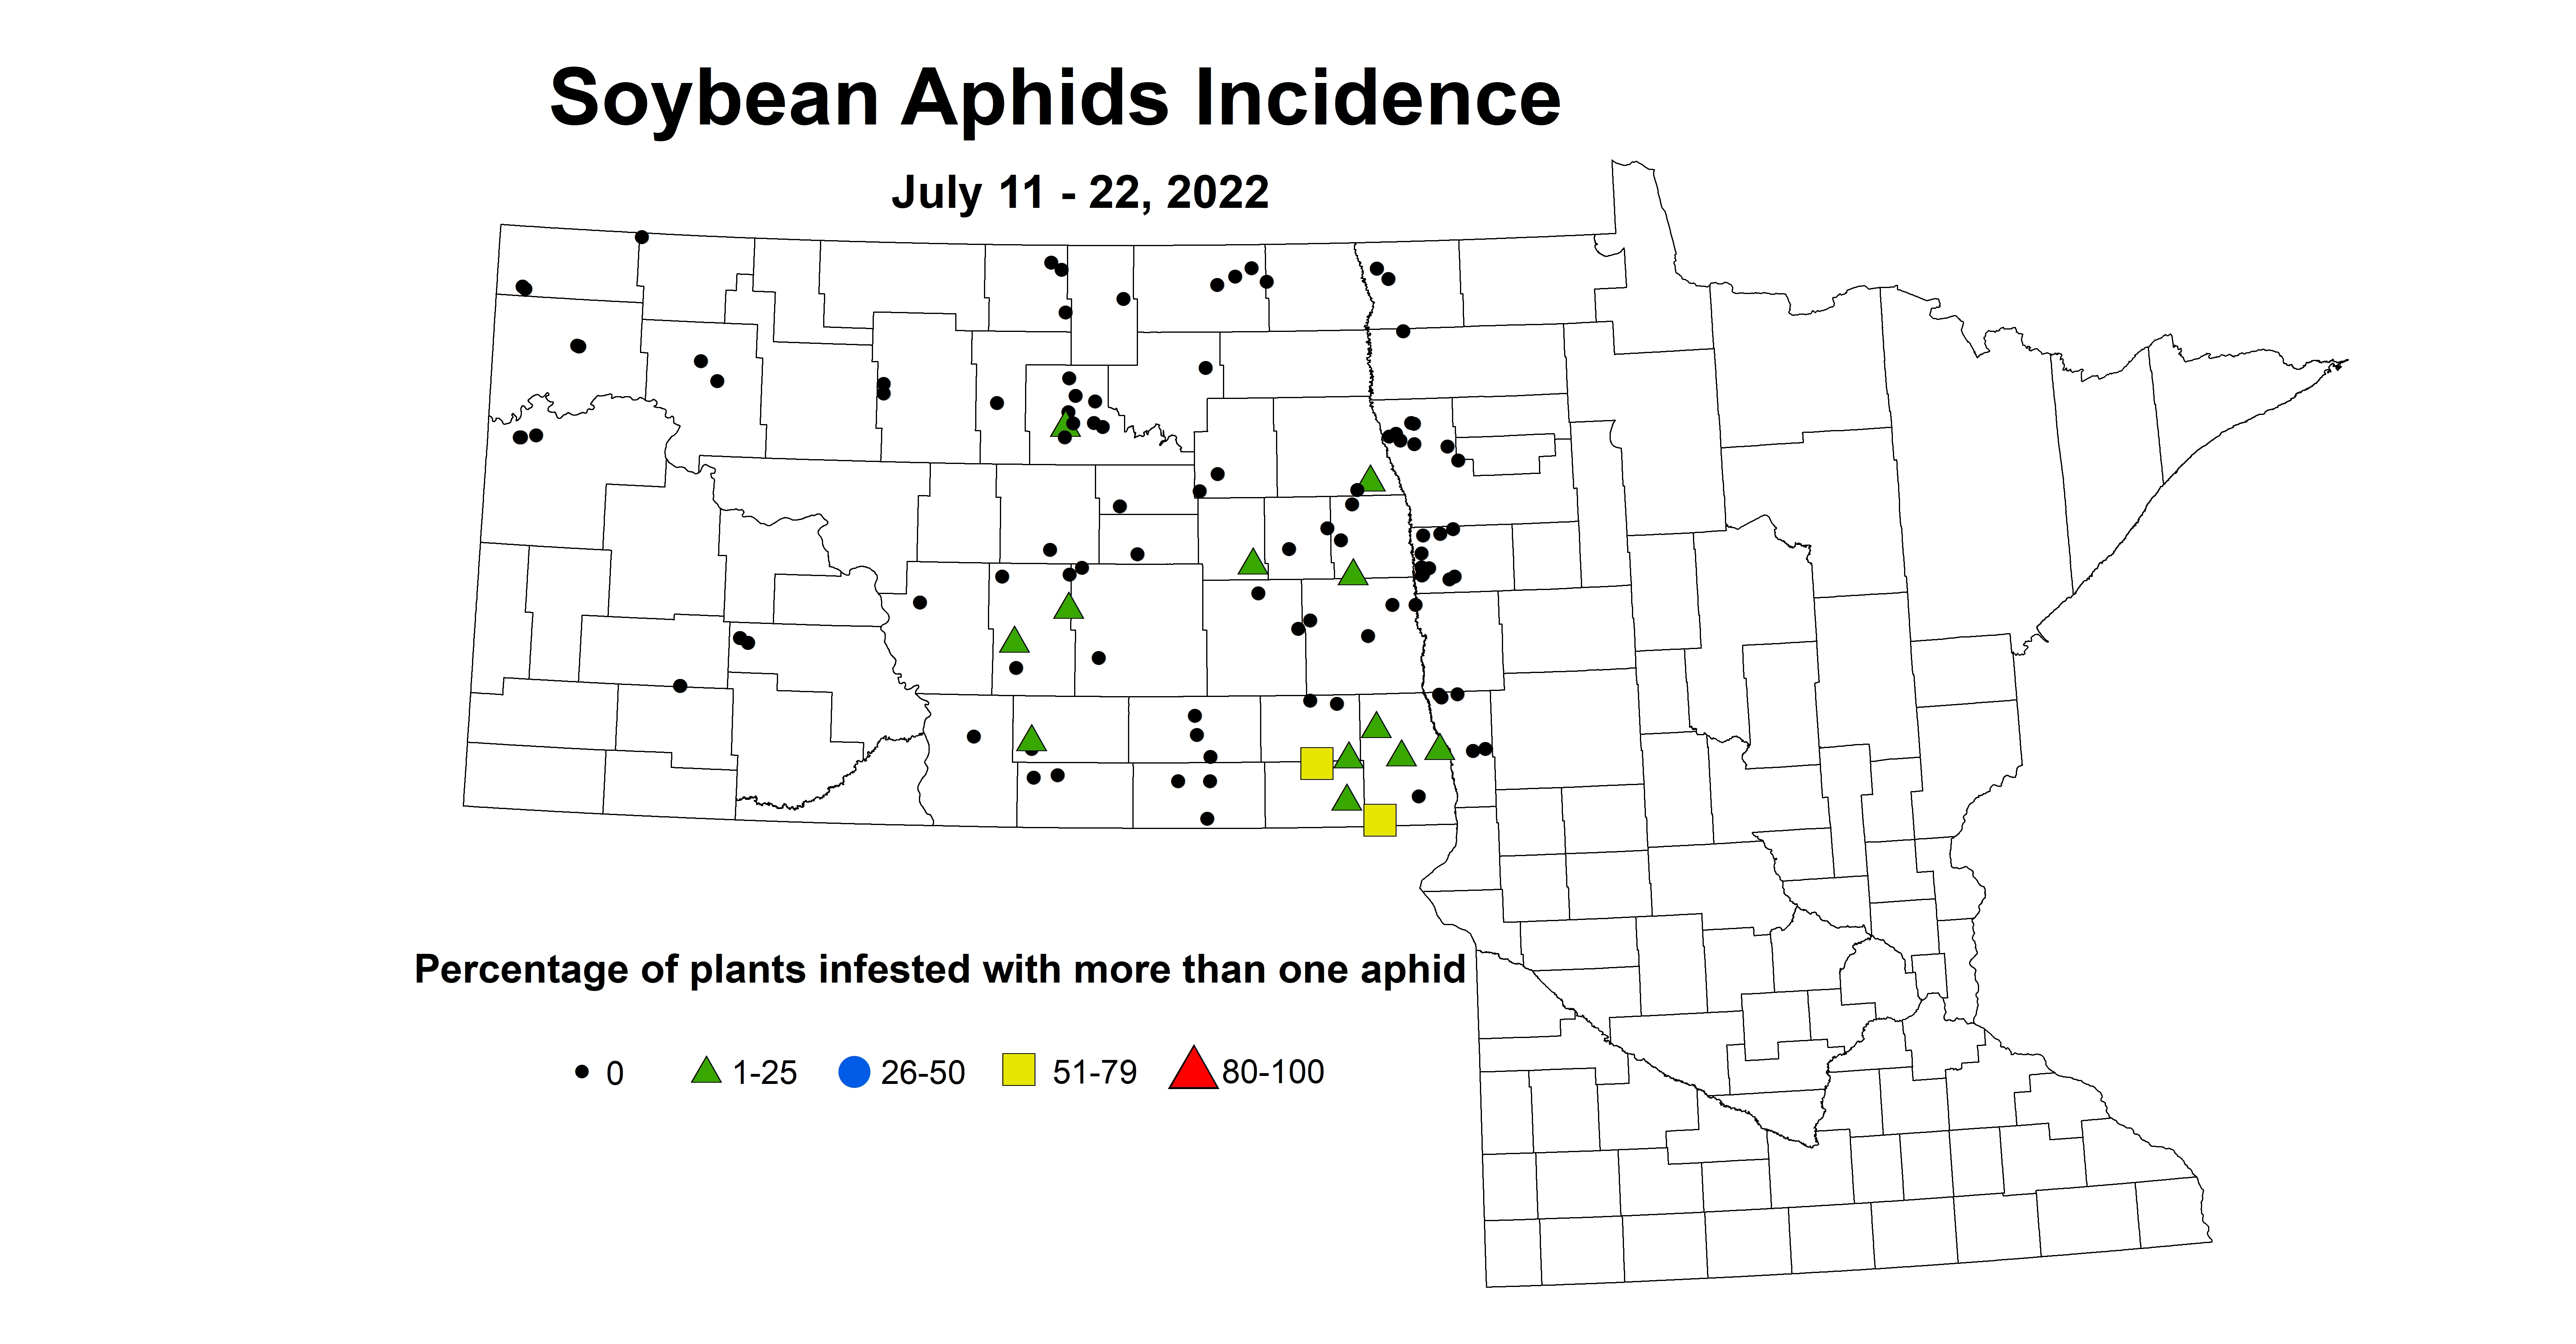 soybean aphid incidence 2022 7.11-7.22